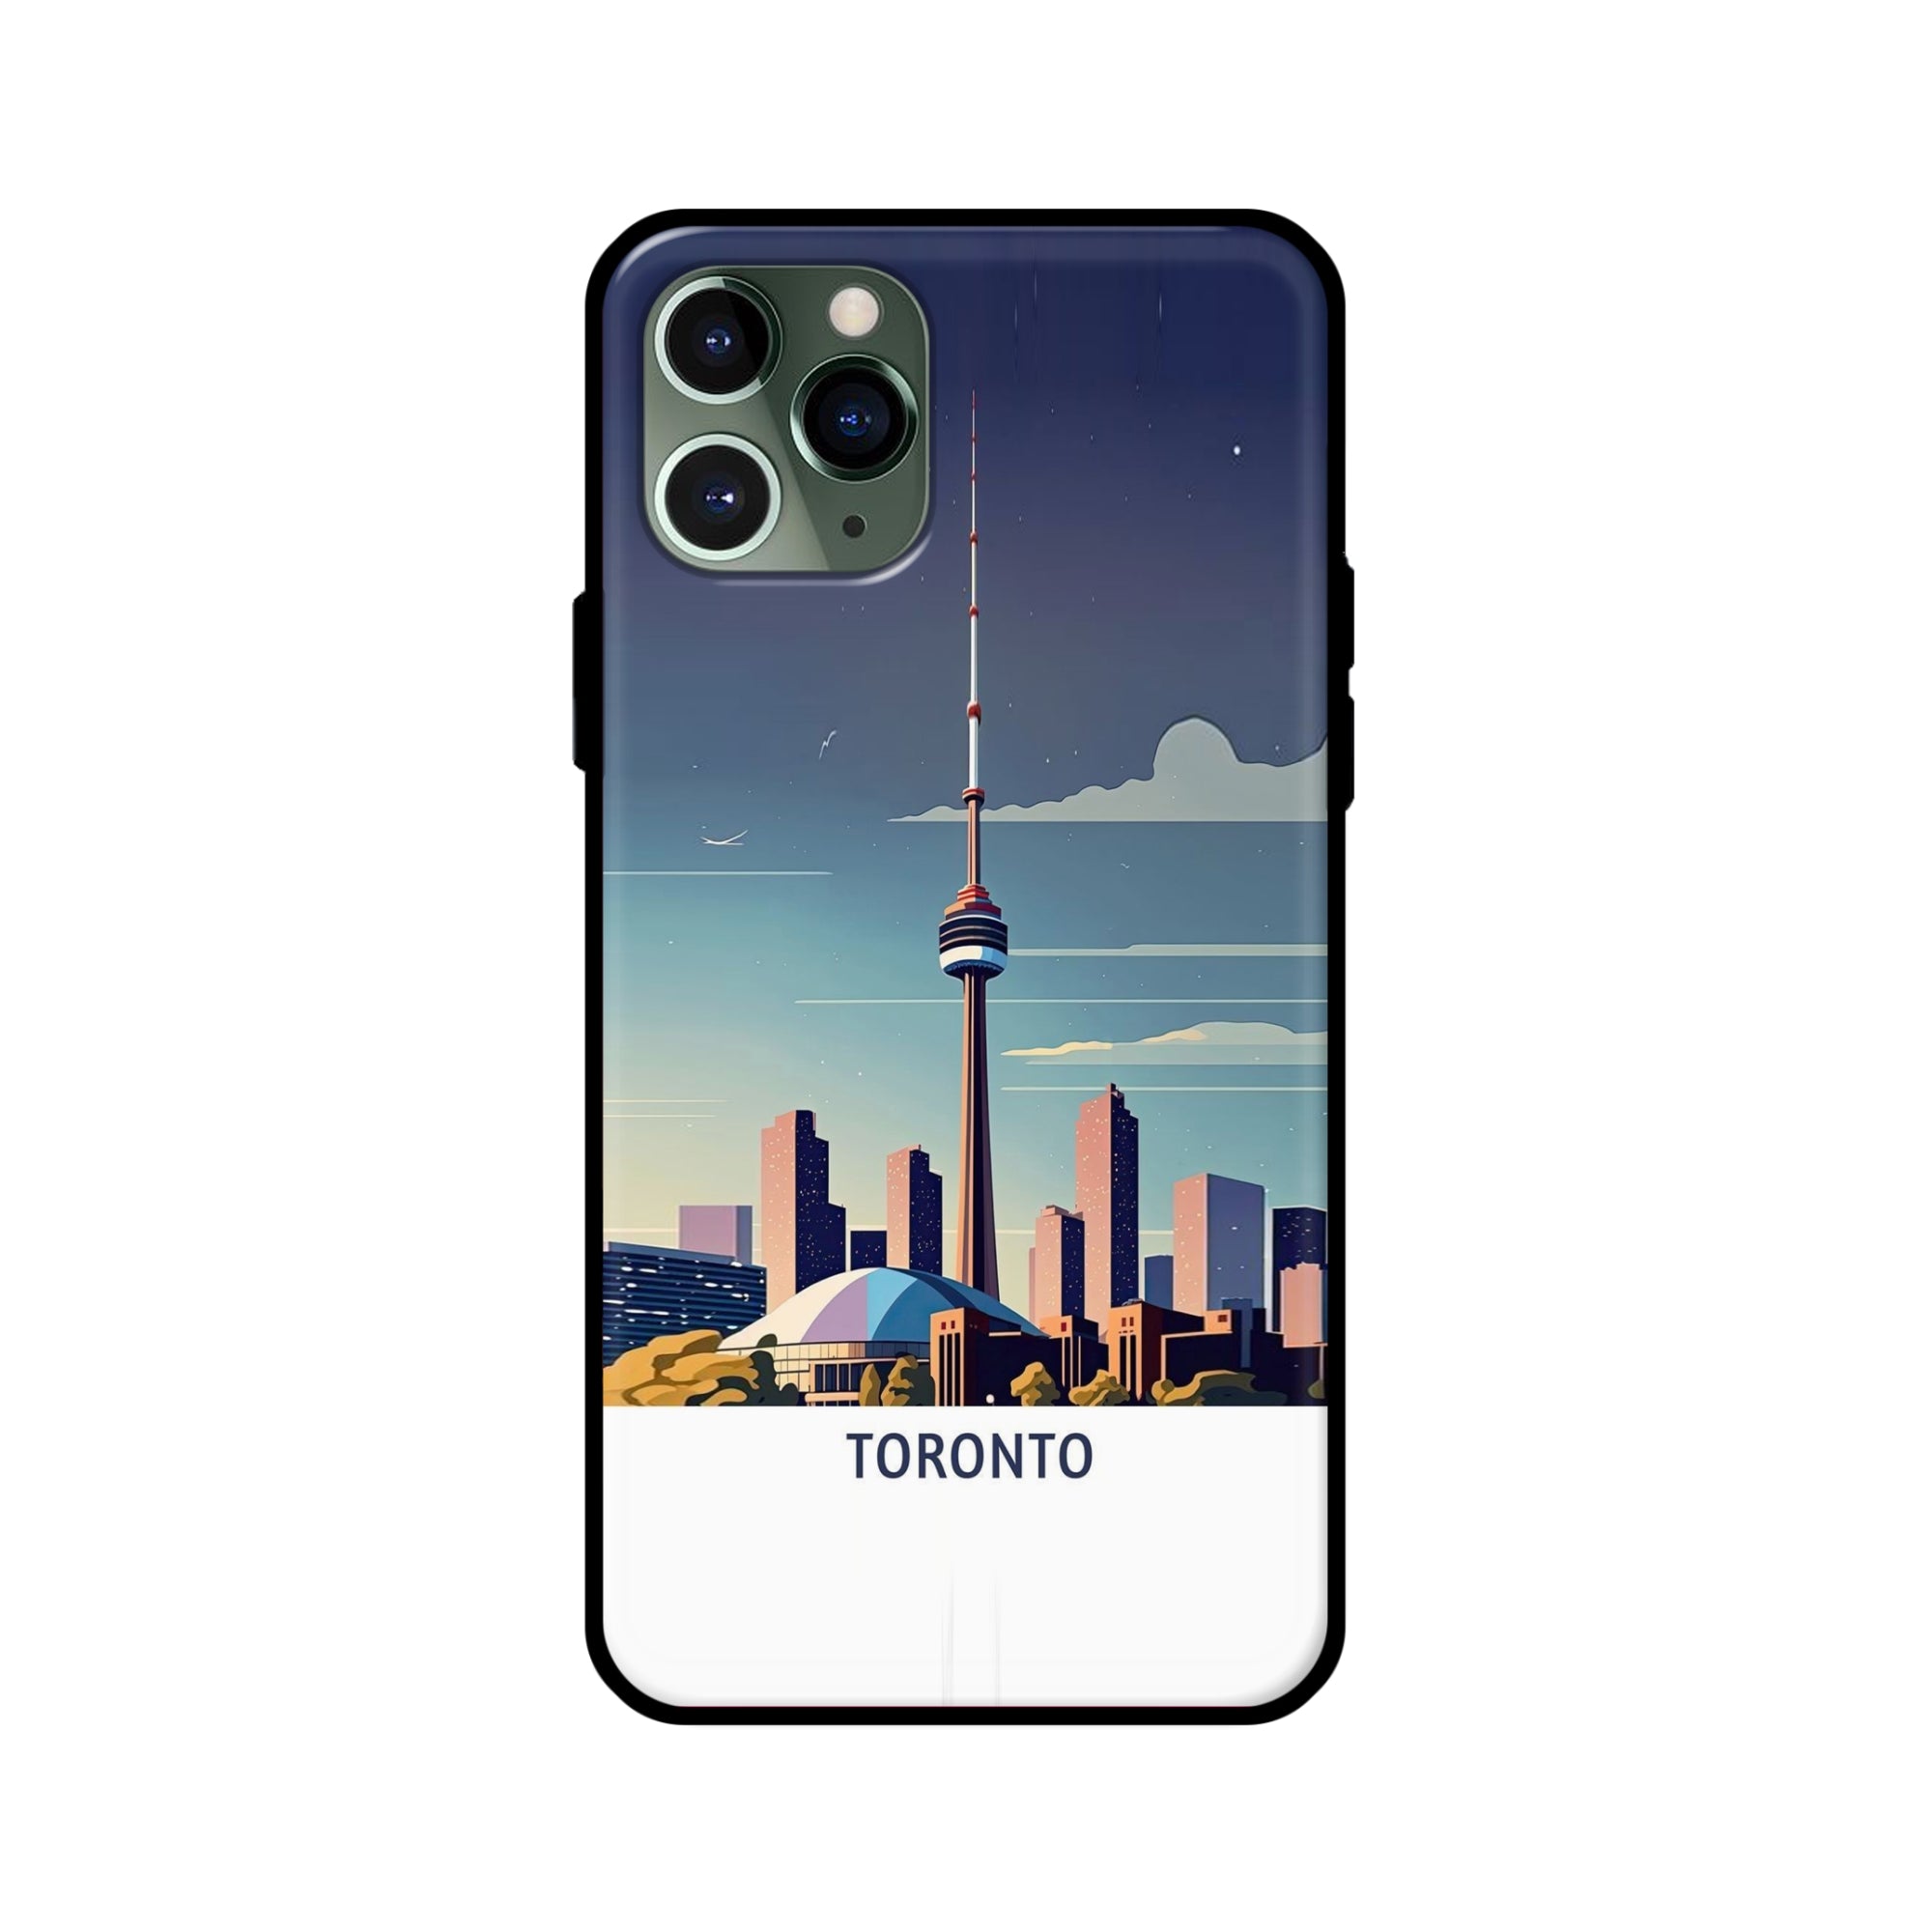 Buy Toronto Glass/Metal Back Mobile Phone Case/Cover For iPhone 11 Pro Online